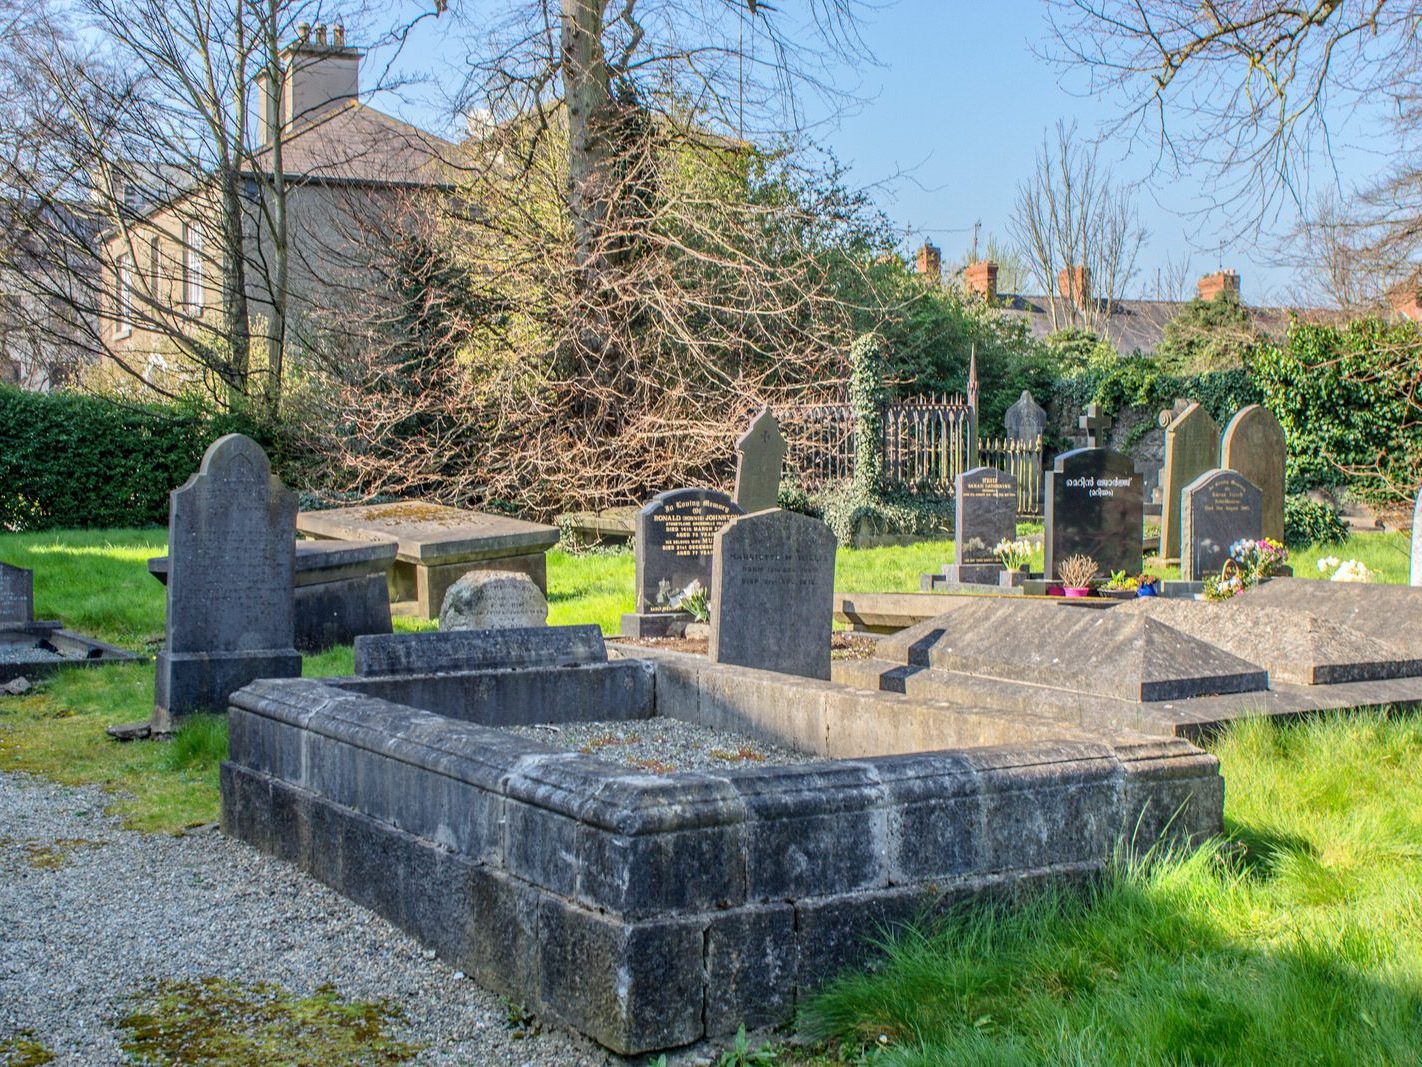 SOME OLD IMAGES OF ST PETERS CHURCHYARD IN DROGHEDA [PHOTOGRAPHED 20212]-224217-1